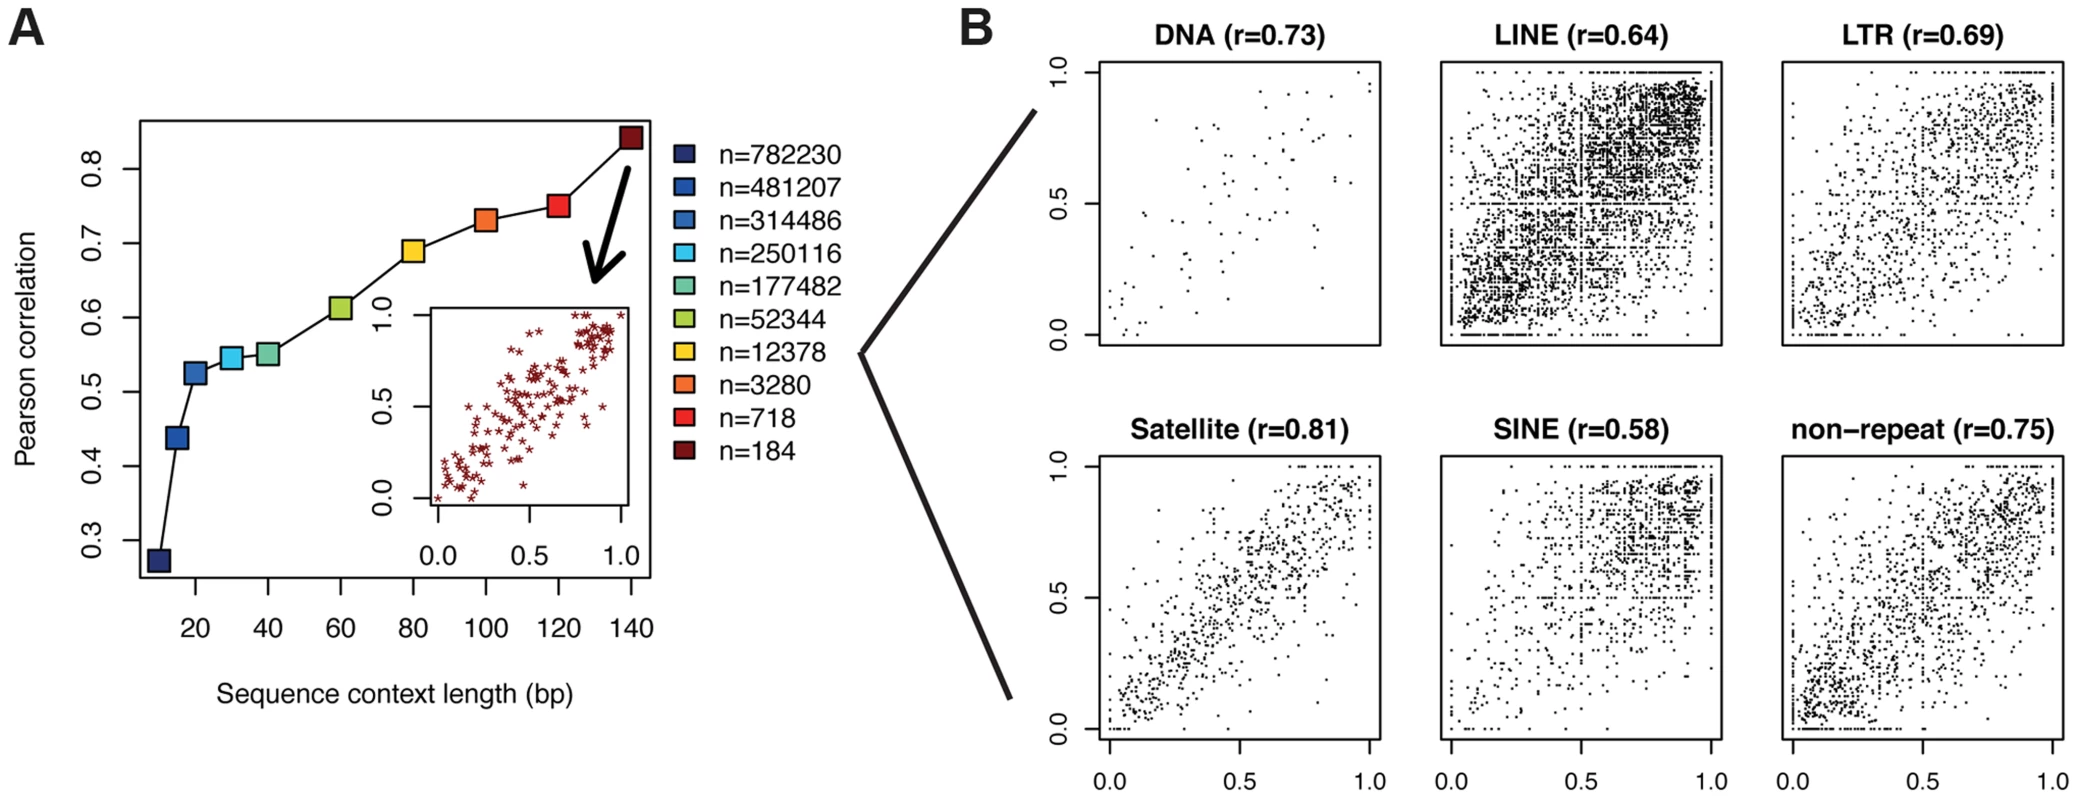 CpGs with identical flanking sequence display similar methylation.